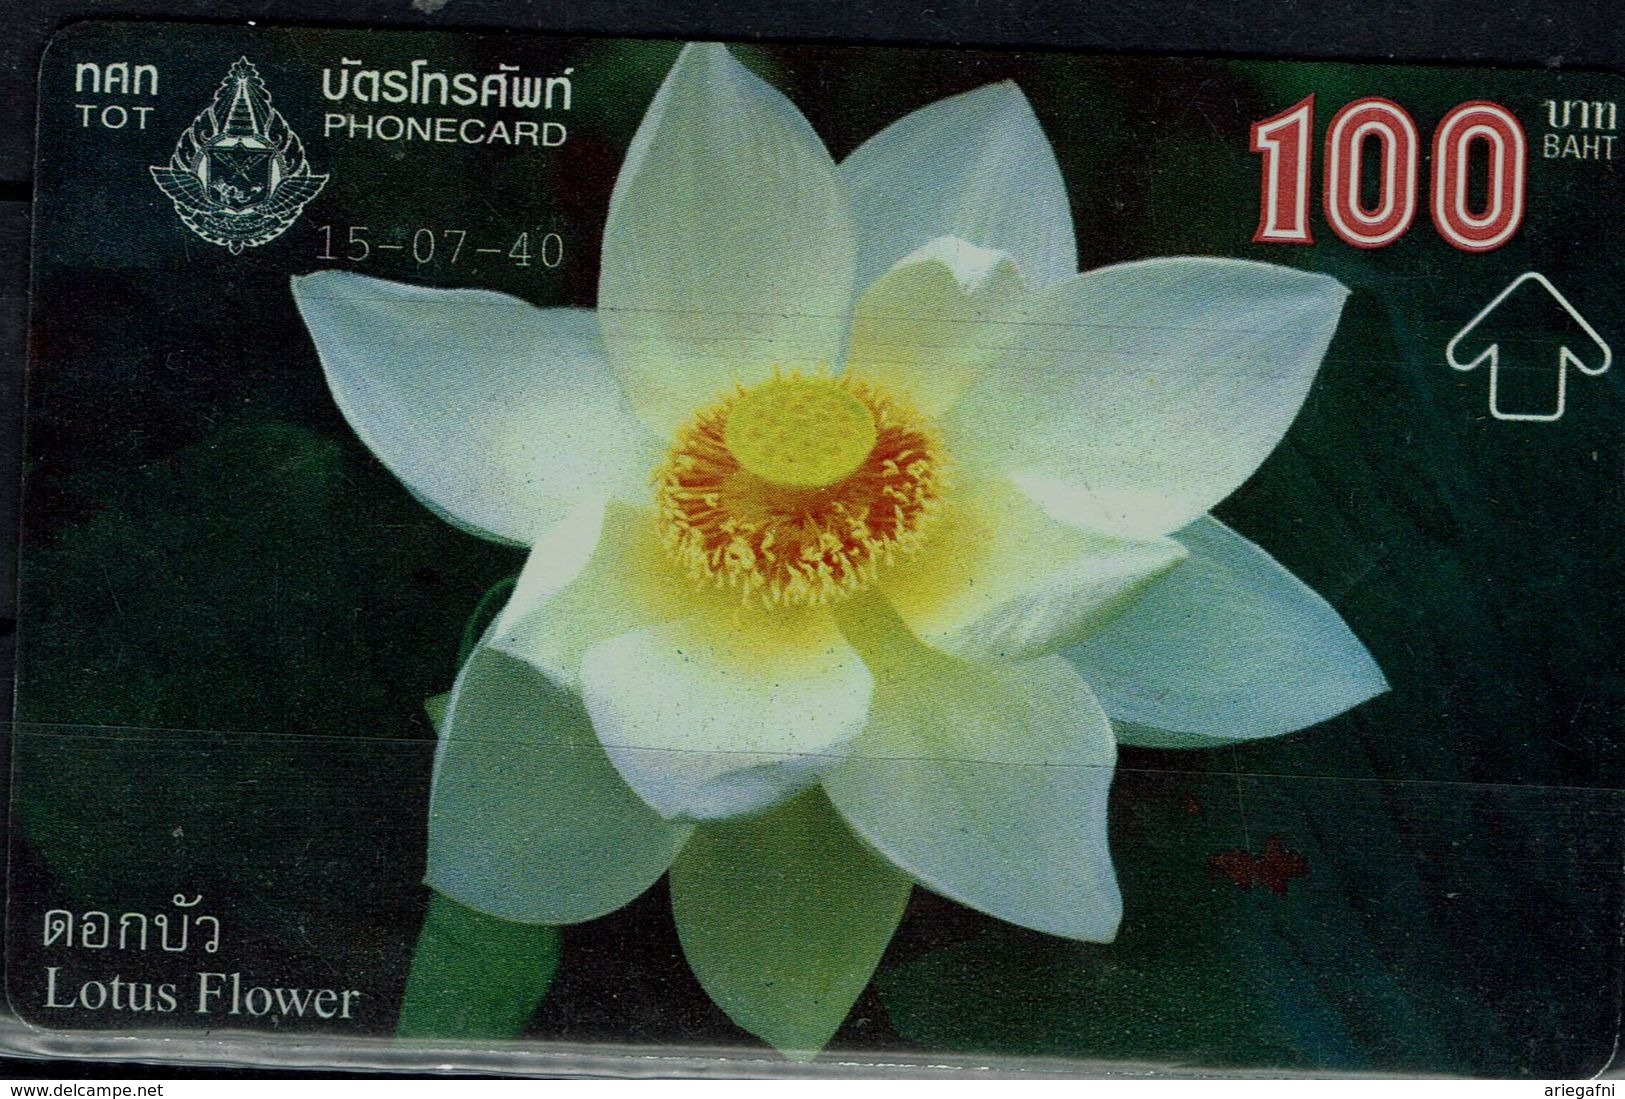 TAILAND 2002 PHONECARD FLOWERS LILY USED VF!! - Flowers